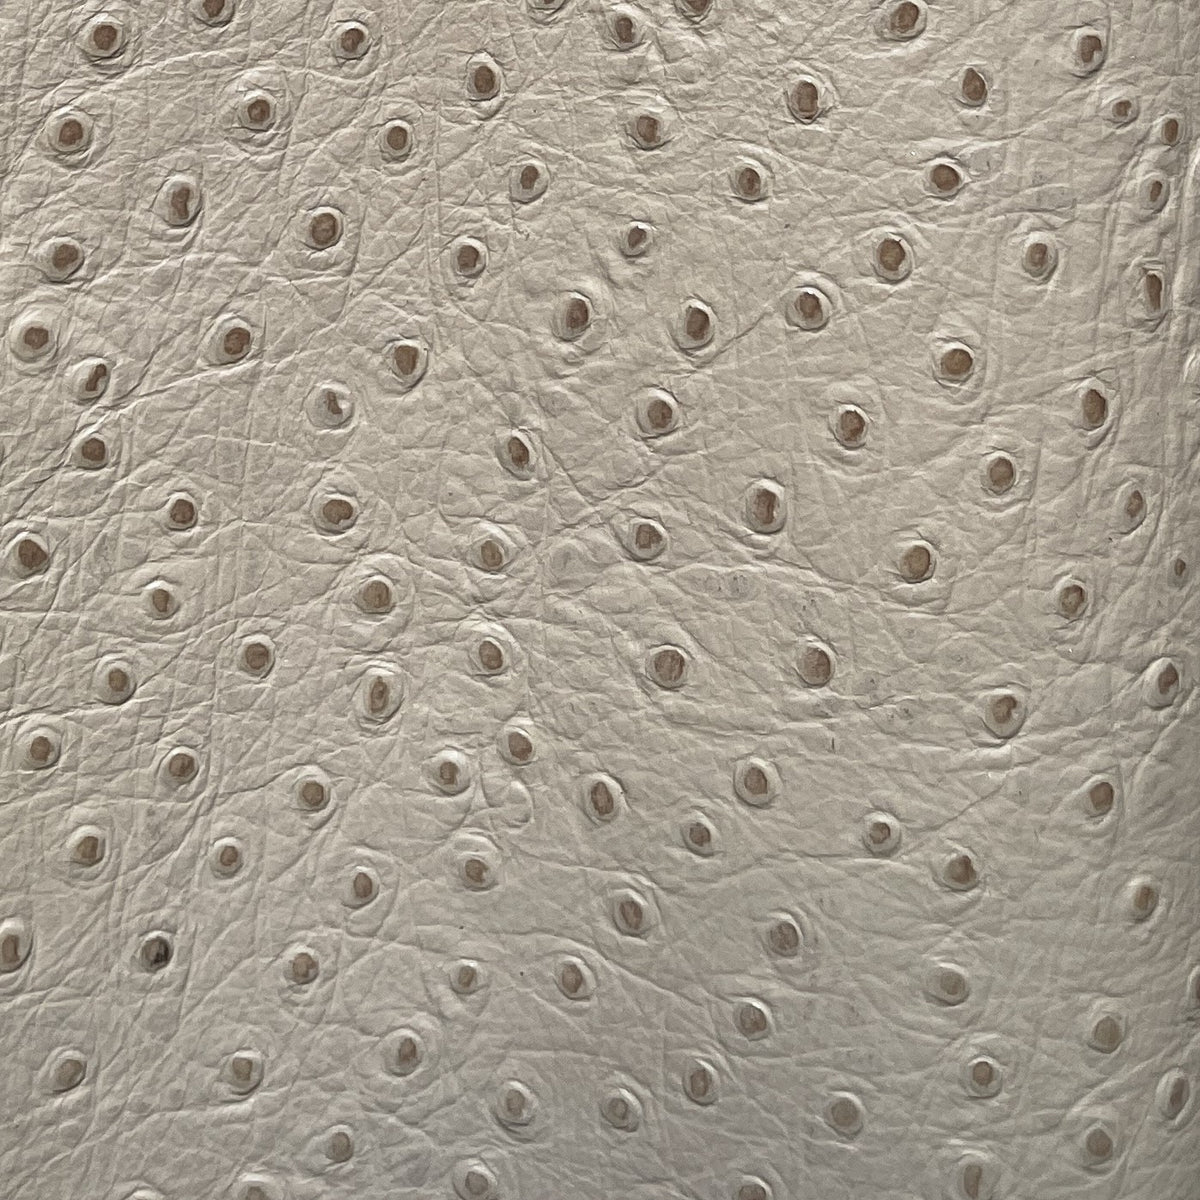 Embossed Ostrich Print Cow Side | Beige | 1.0mm | 22 sq.ft | $195 ea.